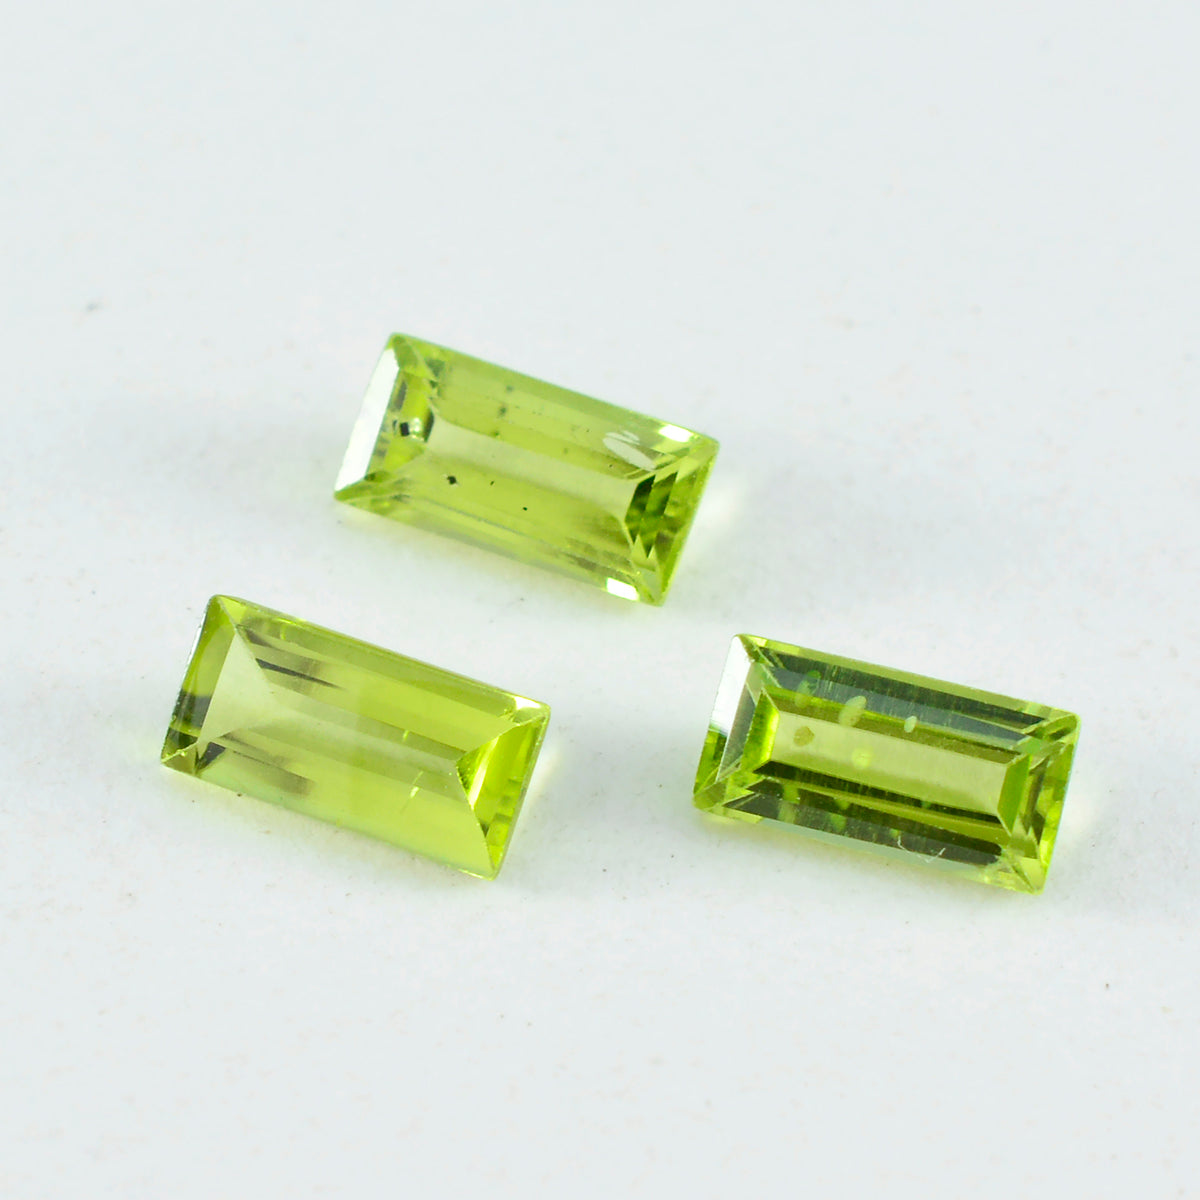 Riyogems 1PC Genuine Green Peridot Faceted 6x12 mm  Baguette Shape attractive Quality Gems